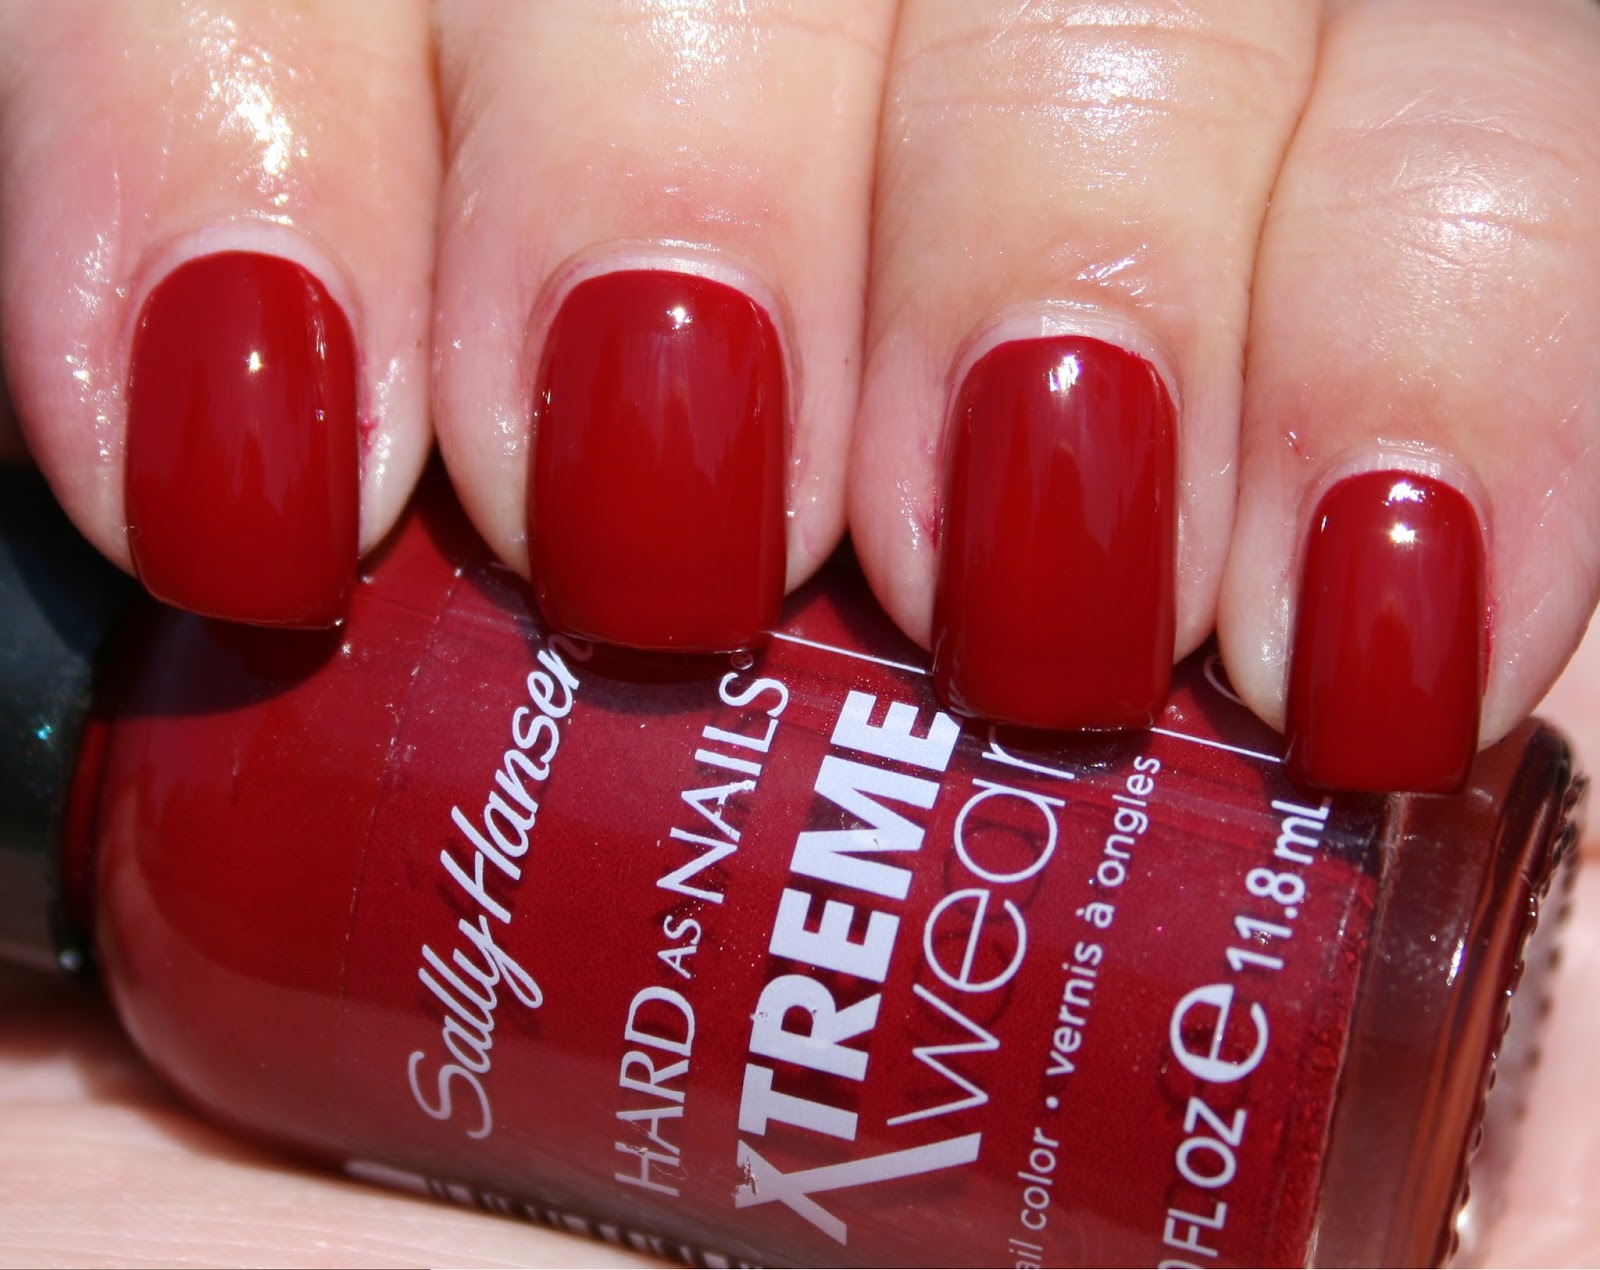 3. Sally Hansen Hard as Nails Xtreme Wear in "White On" - wide 5